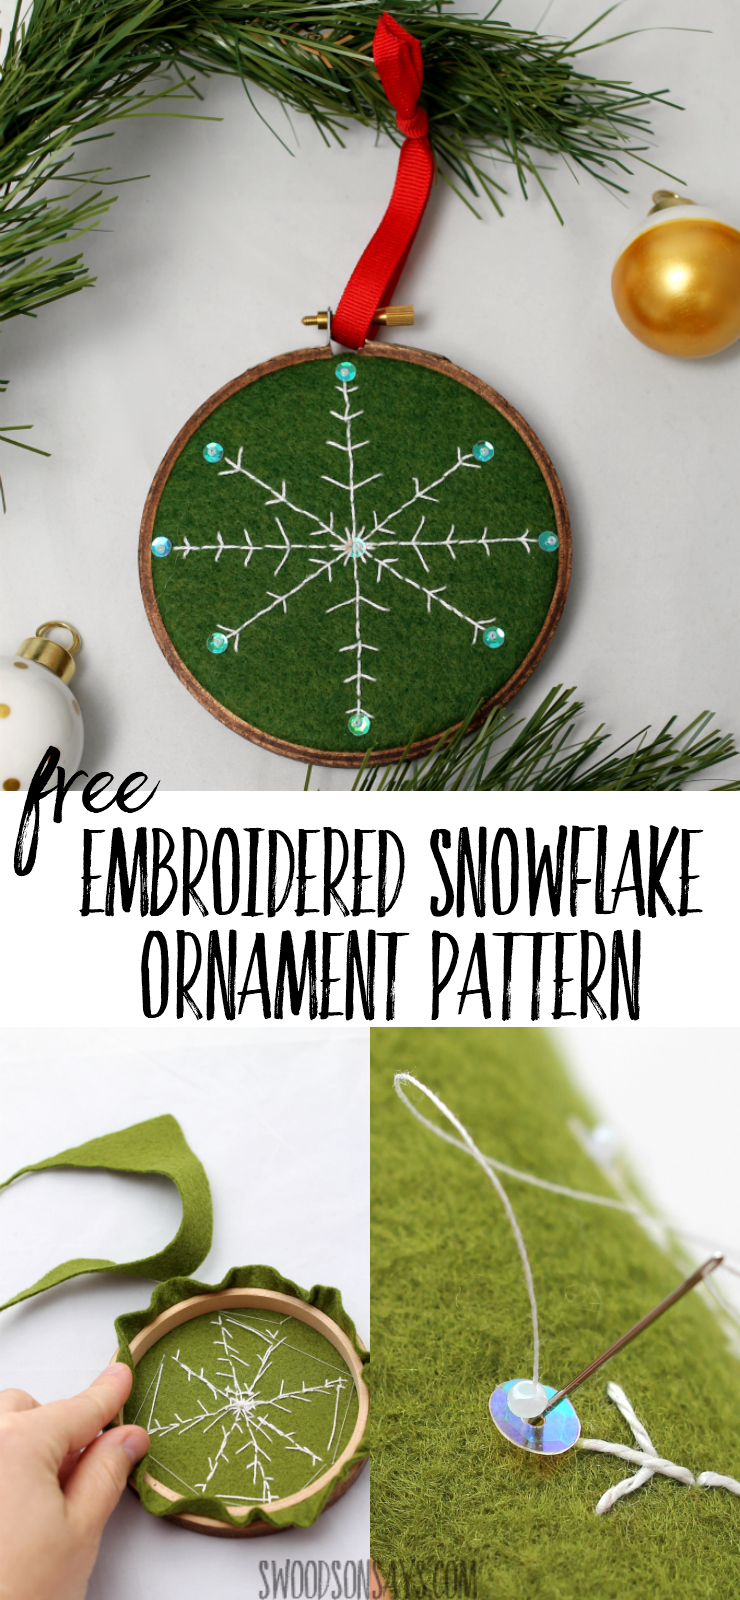 Free DIY embroidered snowflake ornament pattern to stitch up and gift this year! Embroidery hoop ornaments are easy and fun to make, and this snowflake embroidery design uses a simple back stitch that anyone can sew. #diychristmasornament #christmascraft